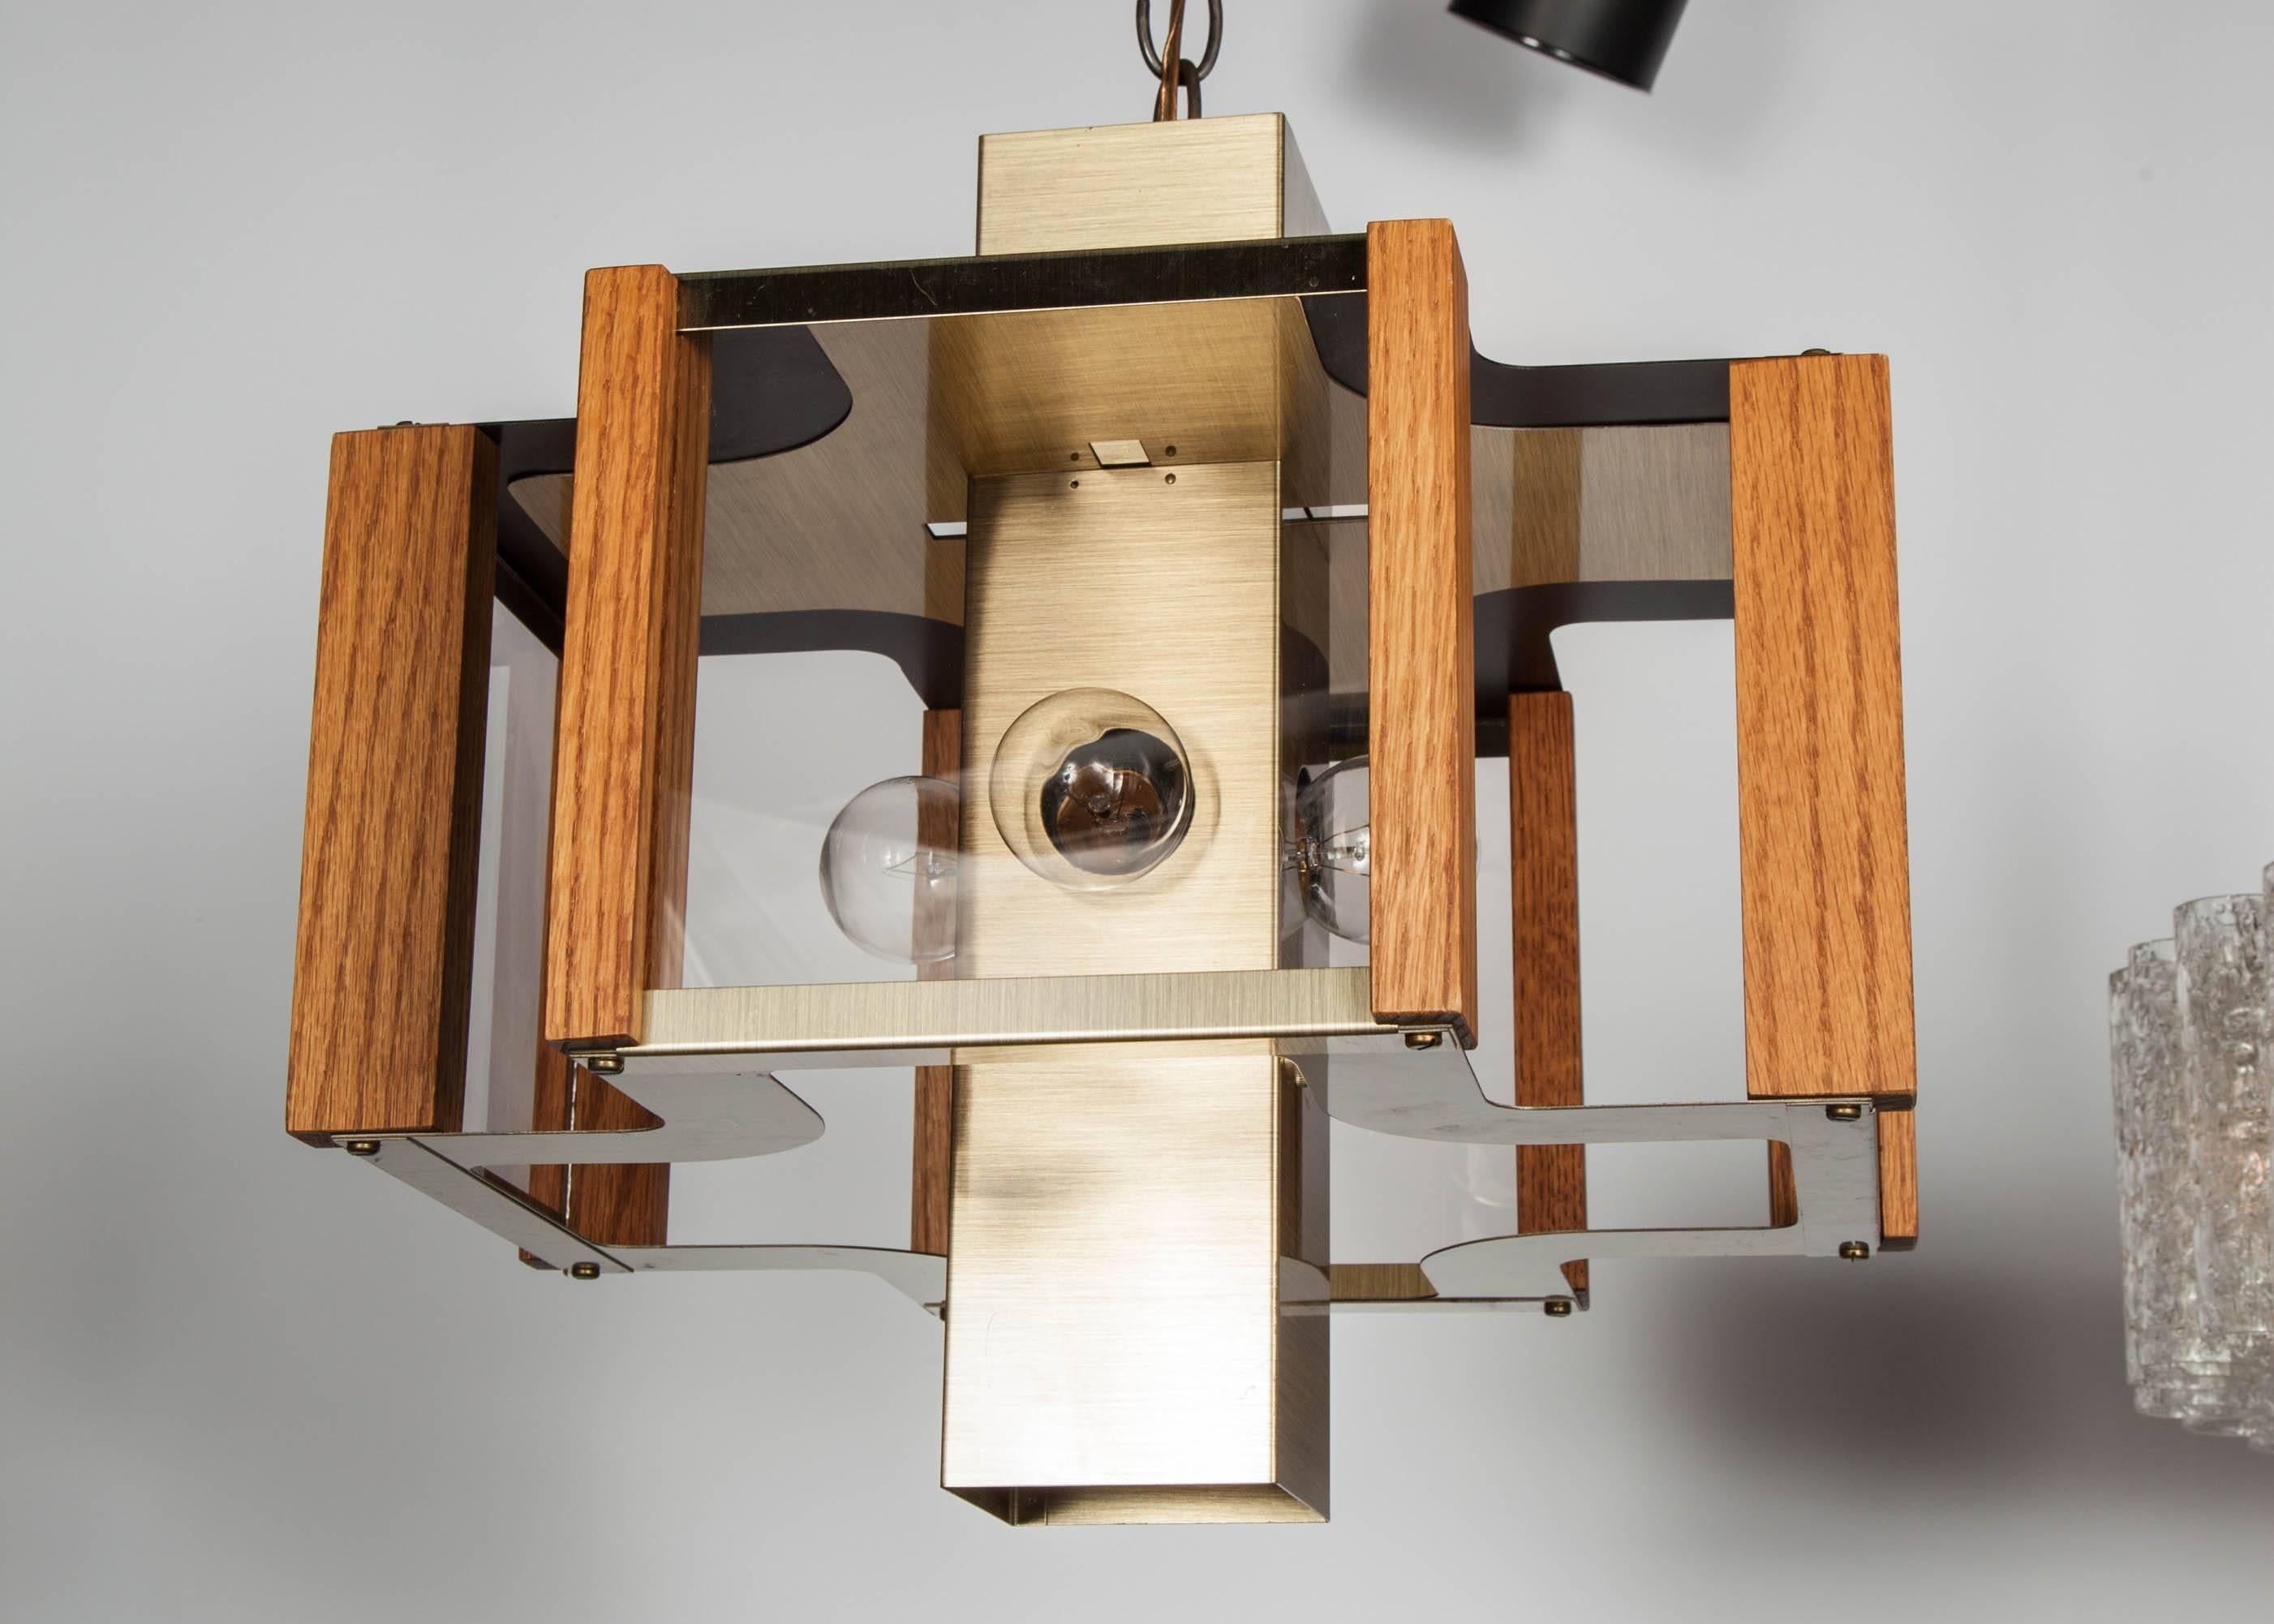 Modernist chandelier with sculptural design. The light fixture features an quadrilateral form comprised of a brushed brass metal frame with walnut wood trim details and smoked glass panels. Fixture has a square column center stem with four equal